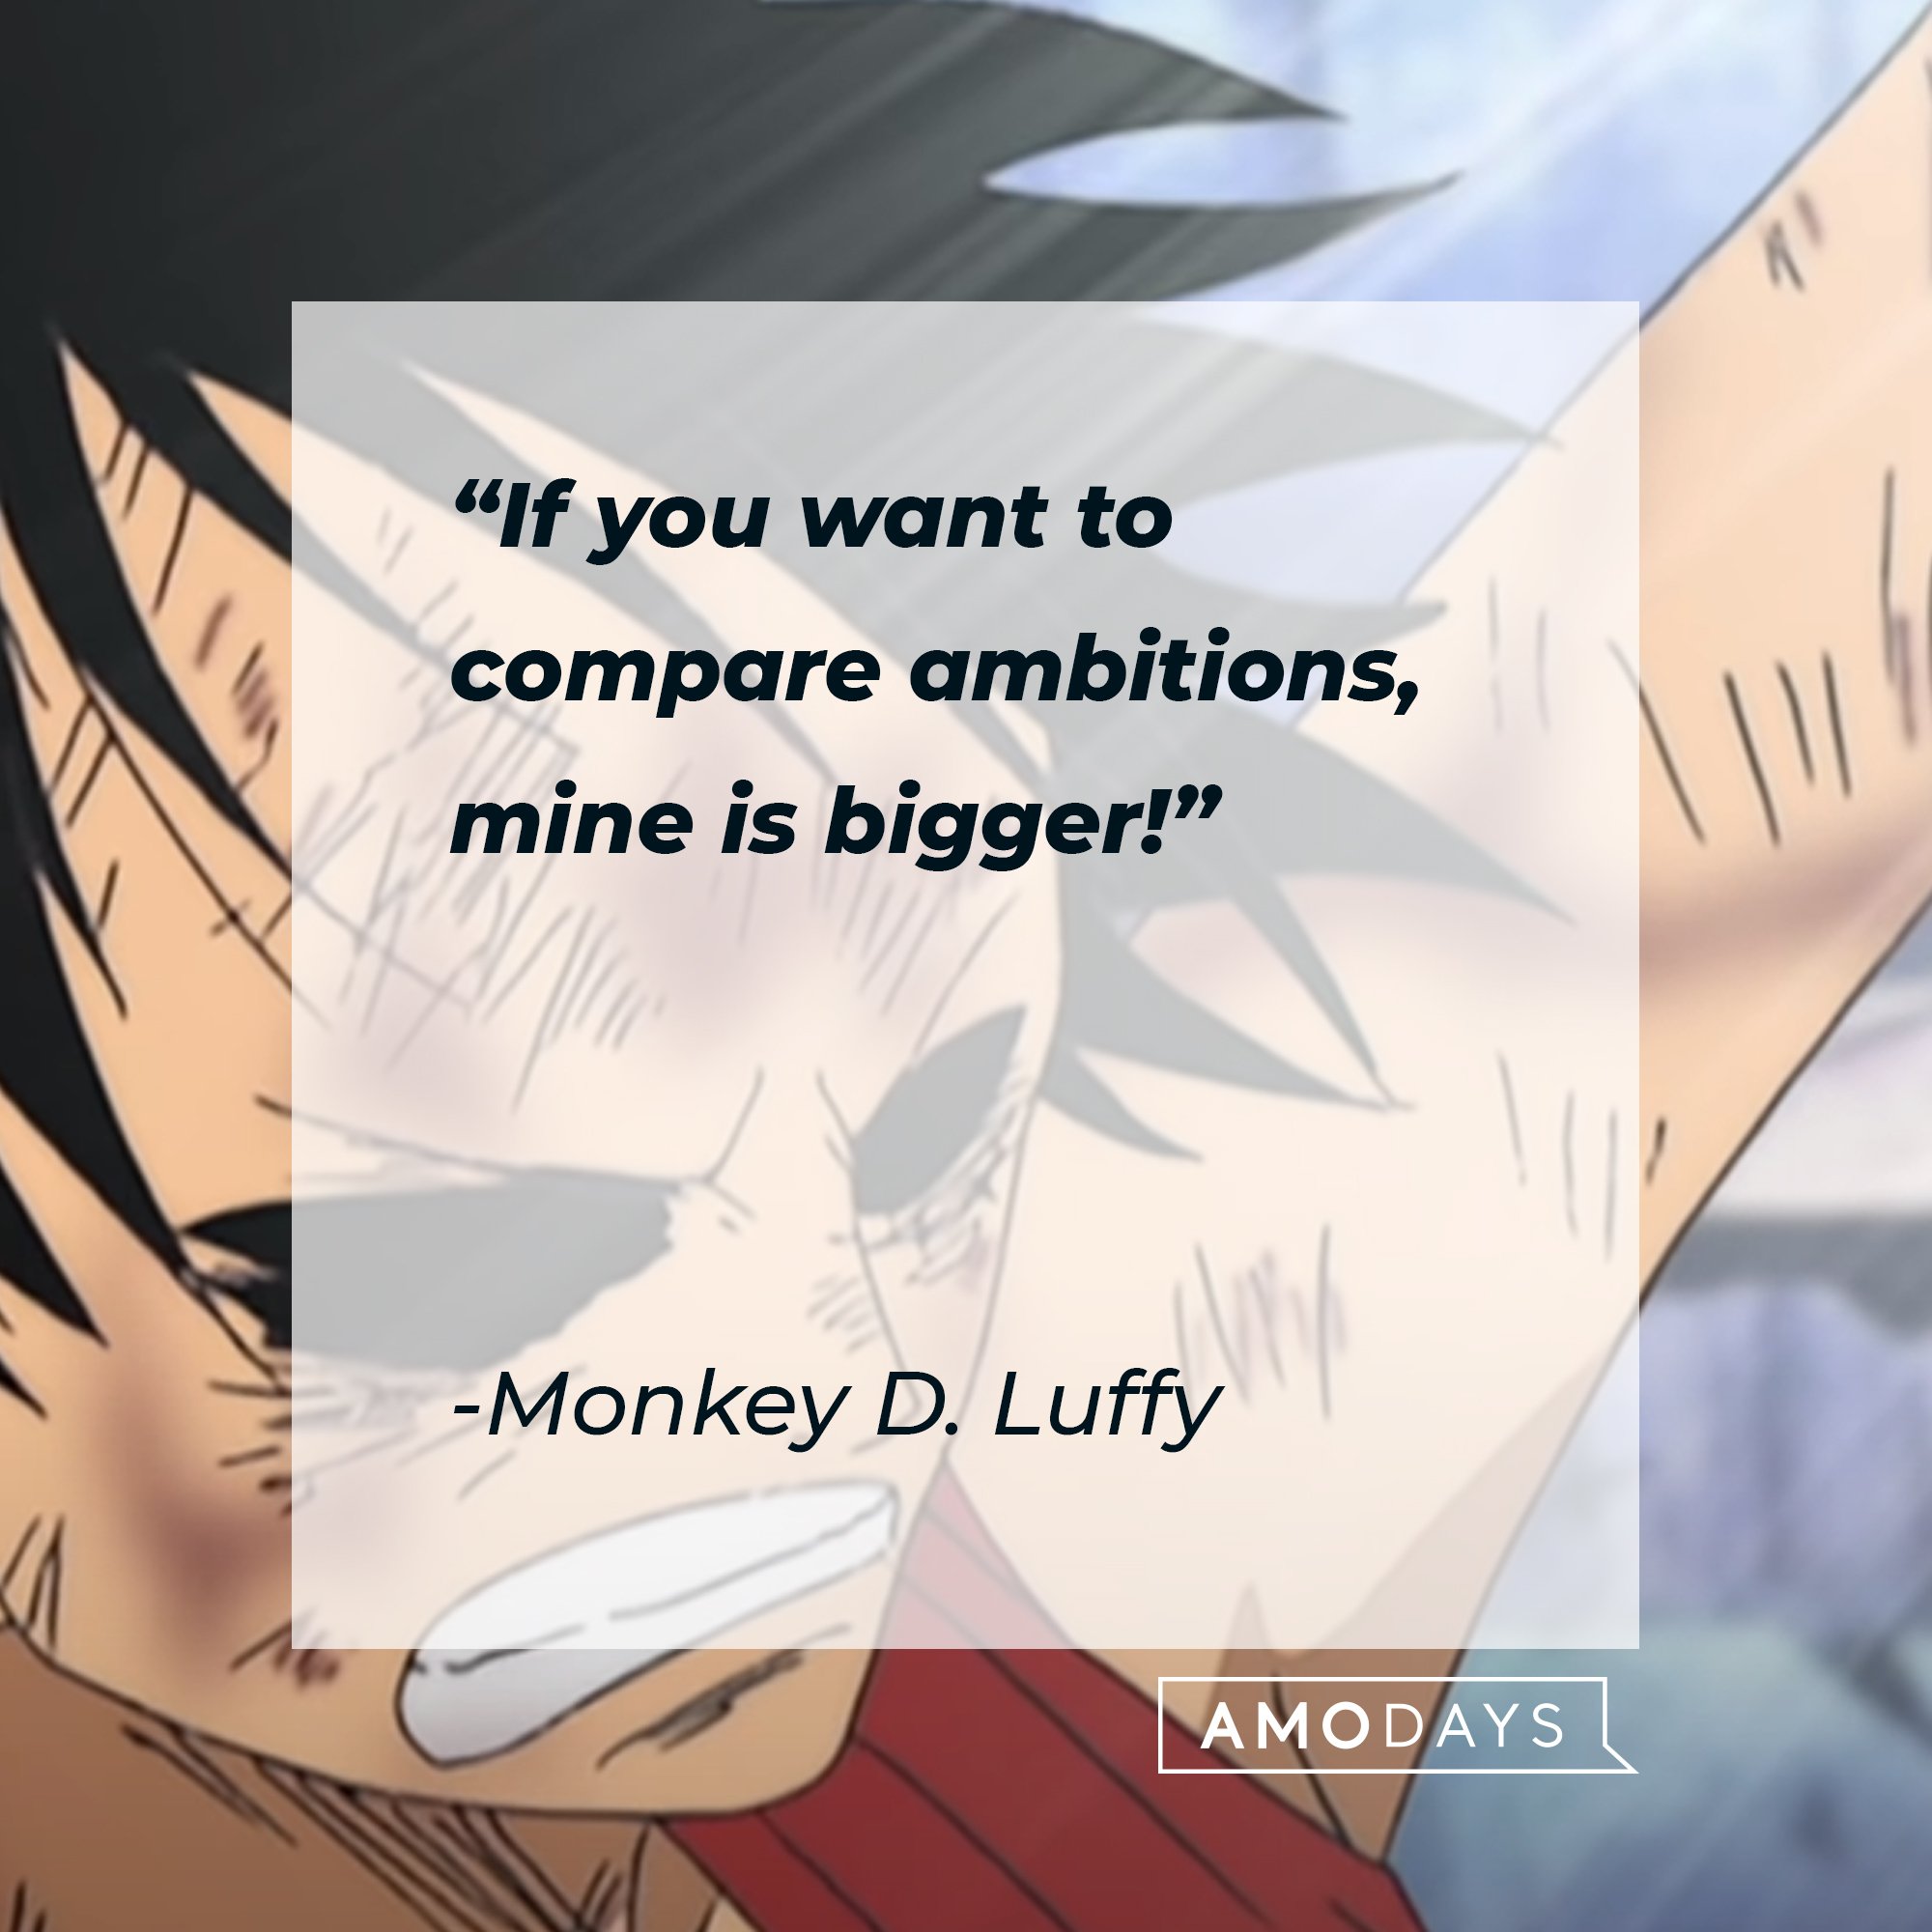 Monkey D. Luffy's quote: "If you want to compare ambitions, mine is bigger!" |  Image: AmoDays